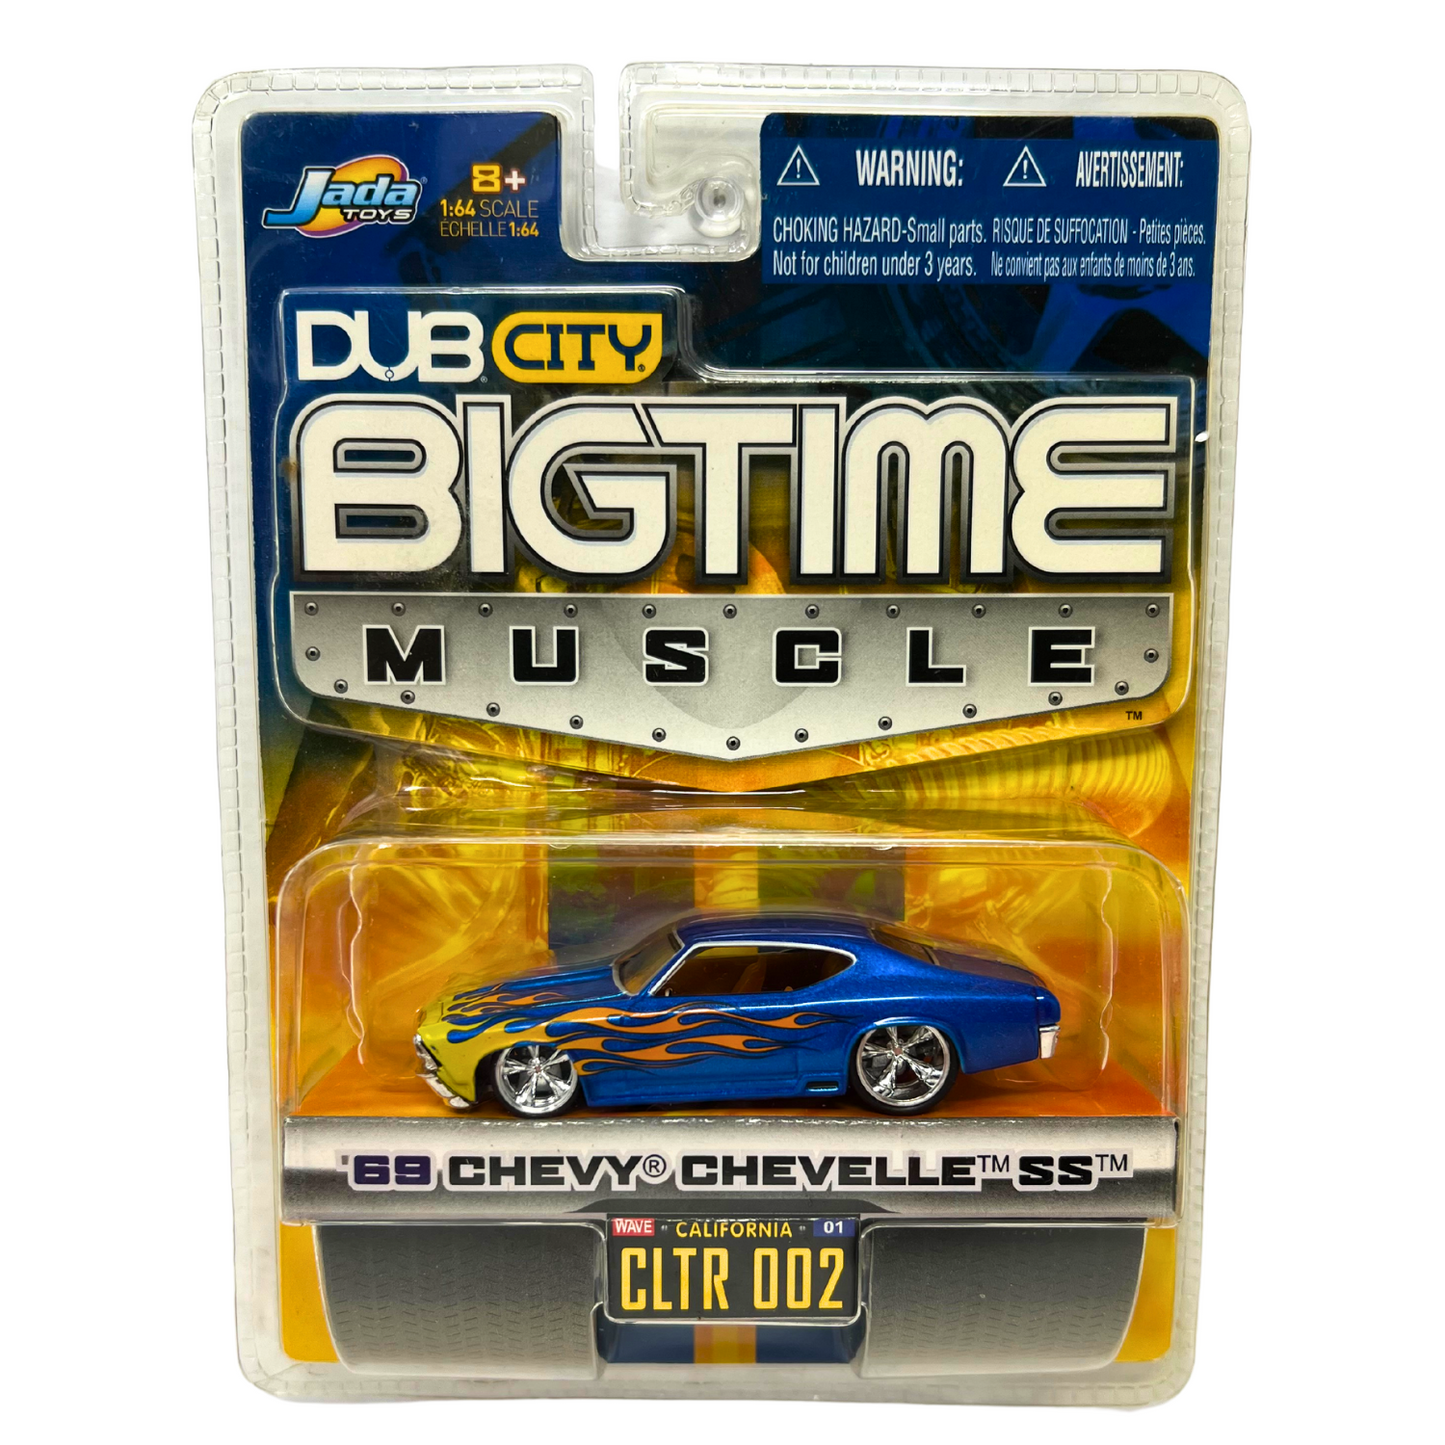 Jada Dub City Bigtime Muscle '69 Chevy Chevelle SS 1:64 Diecast Blue with Flames